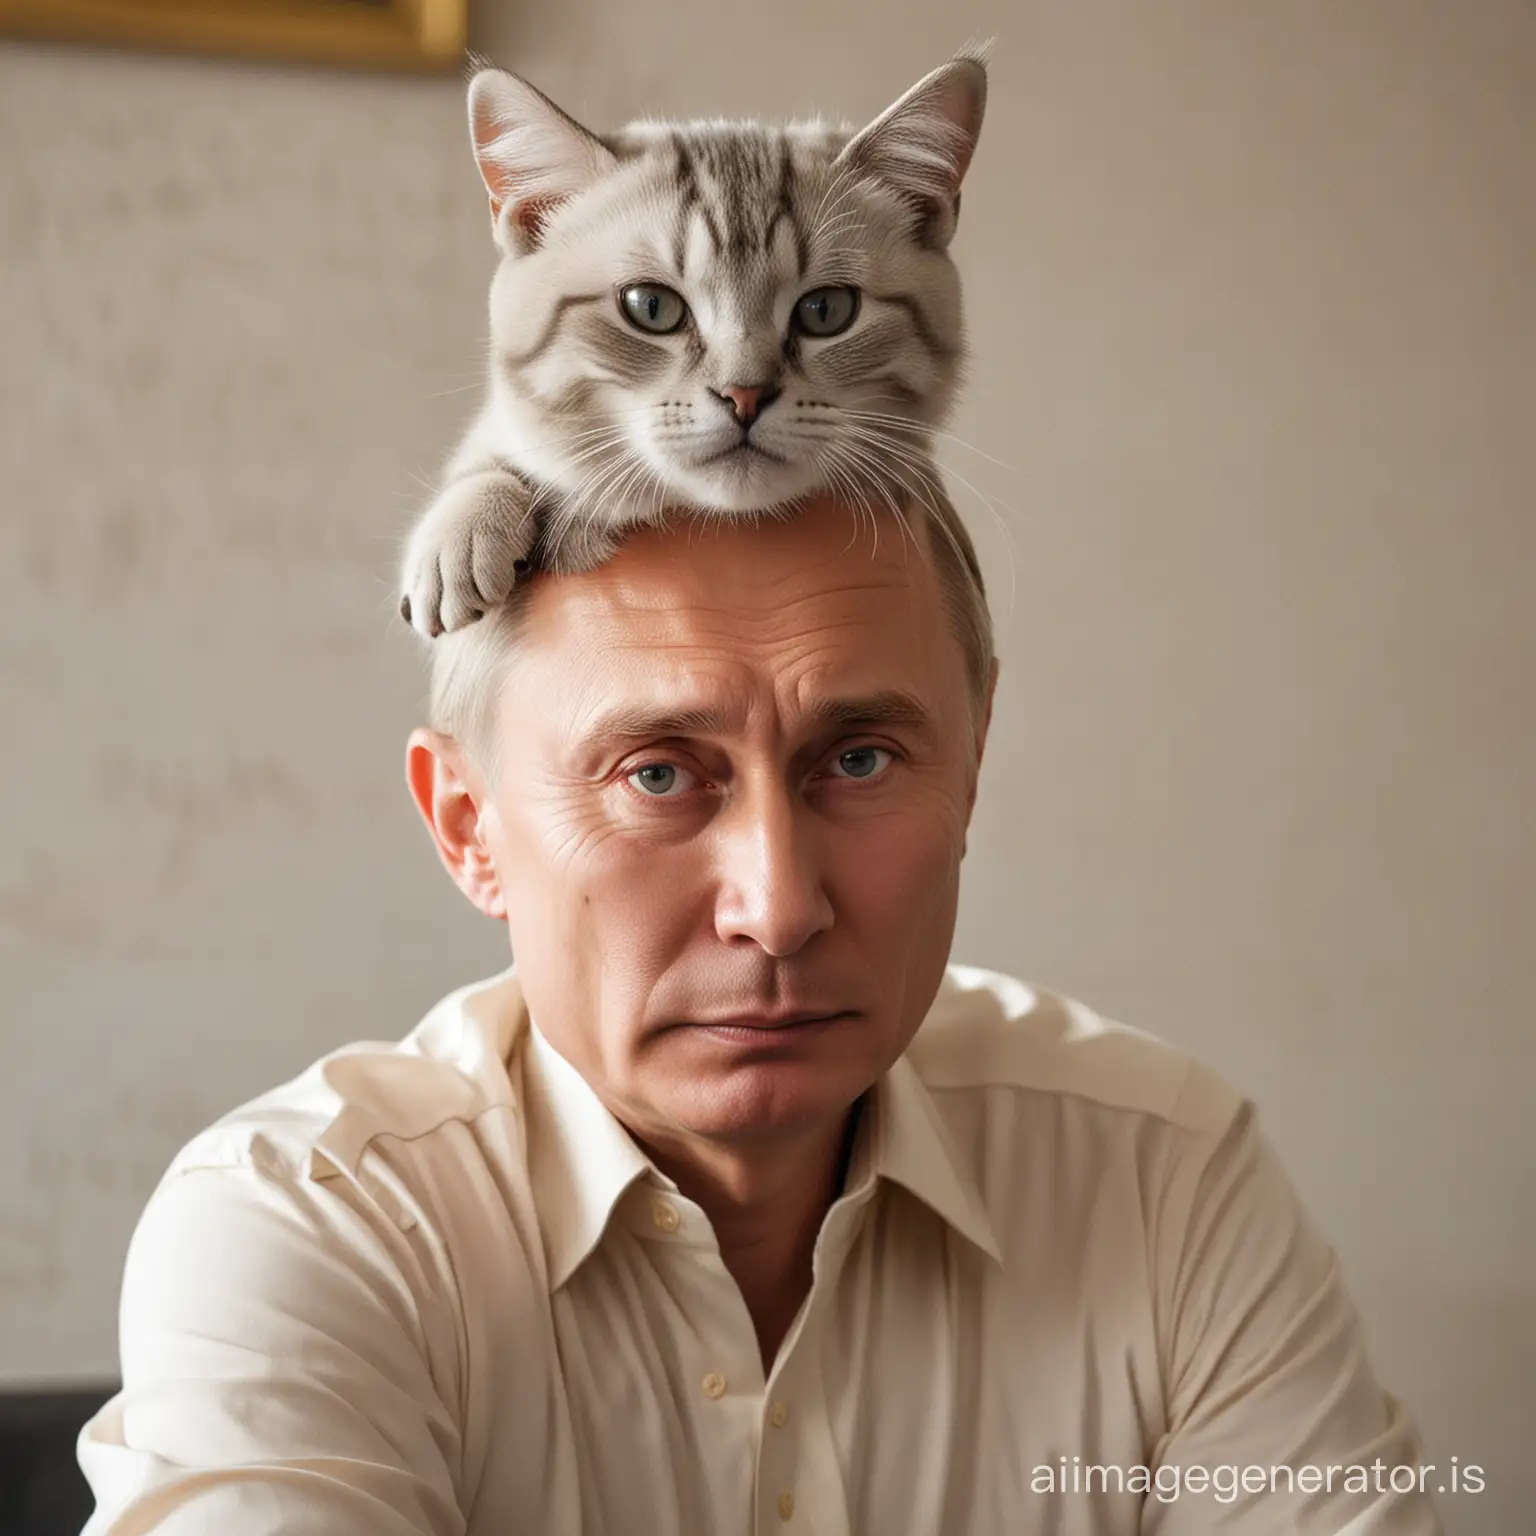 Putin with a serious look on his face. A cat is sitting on his head